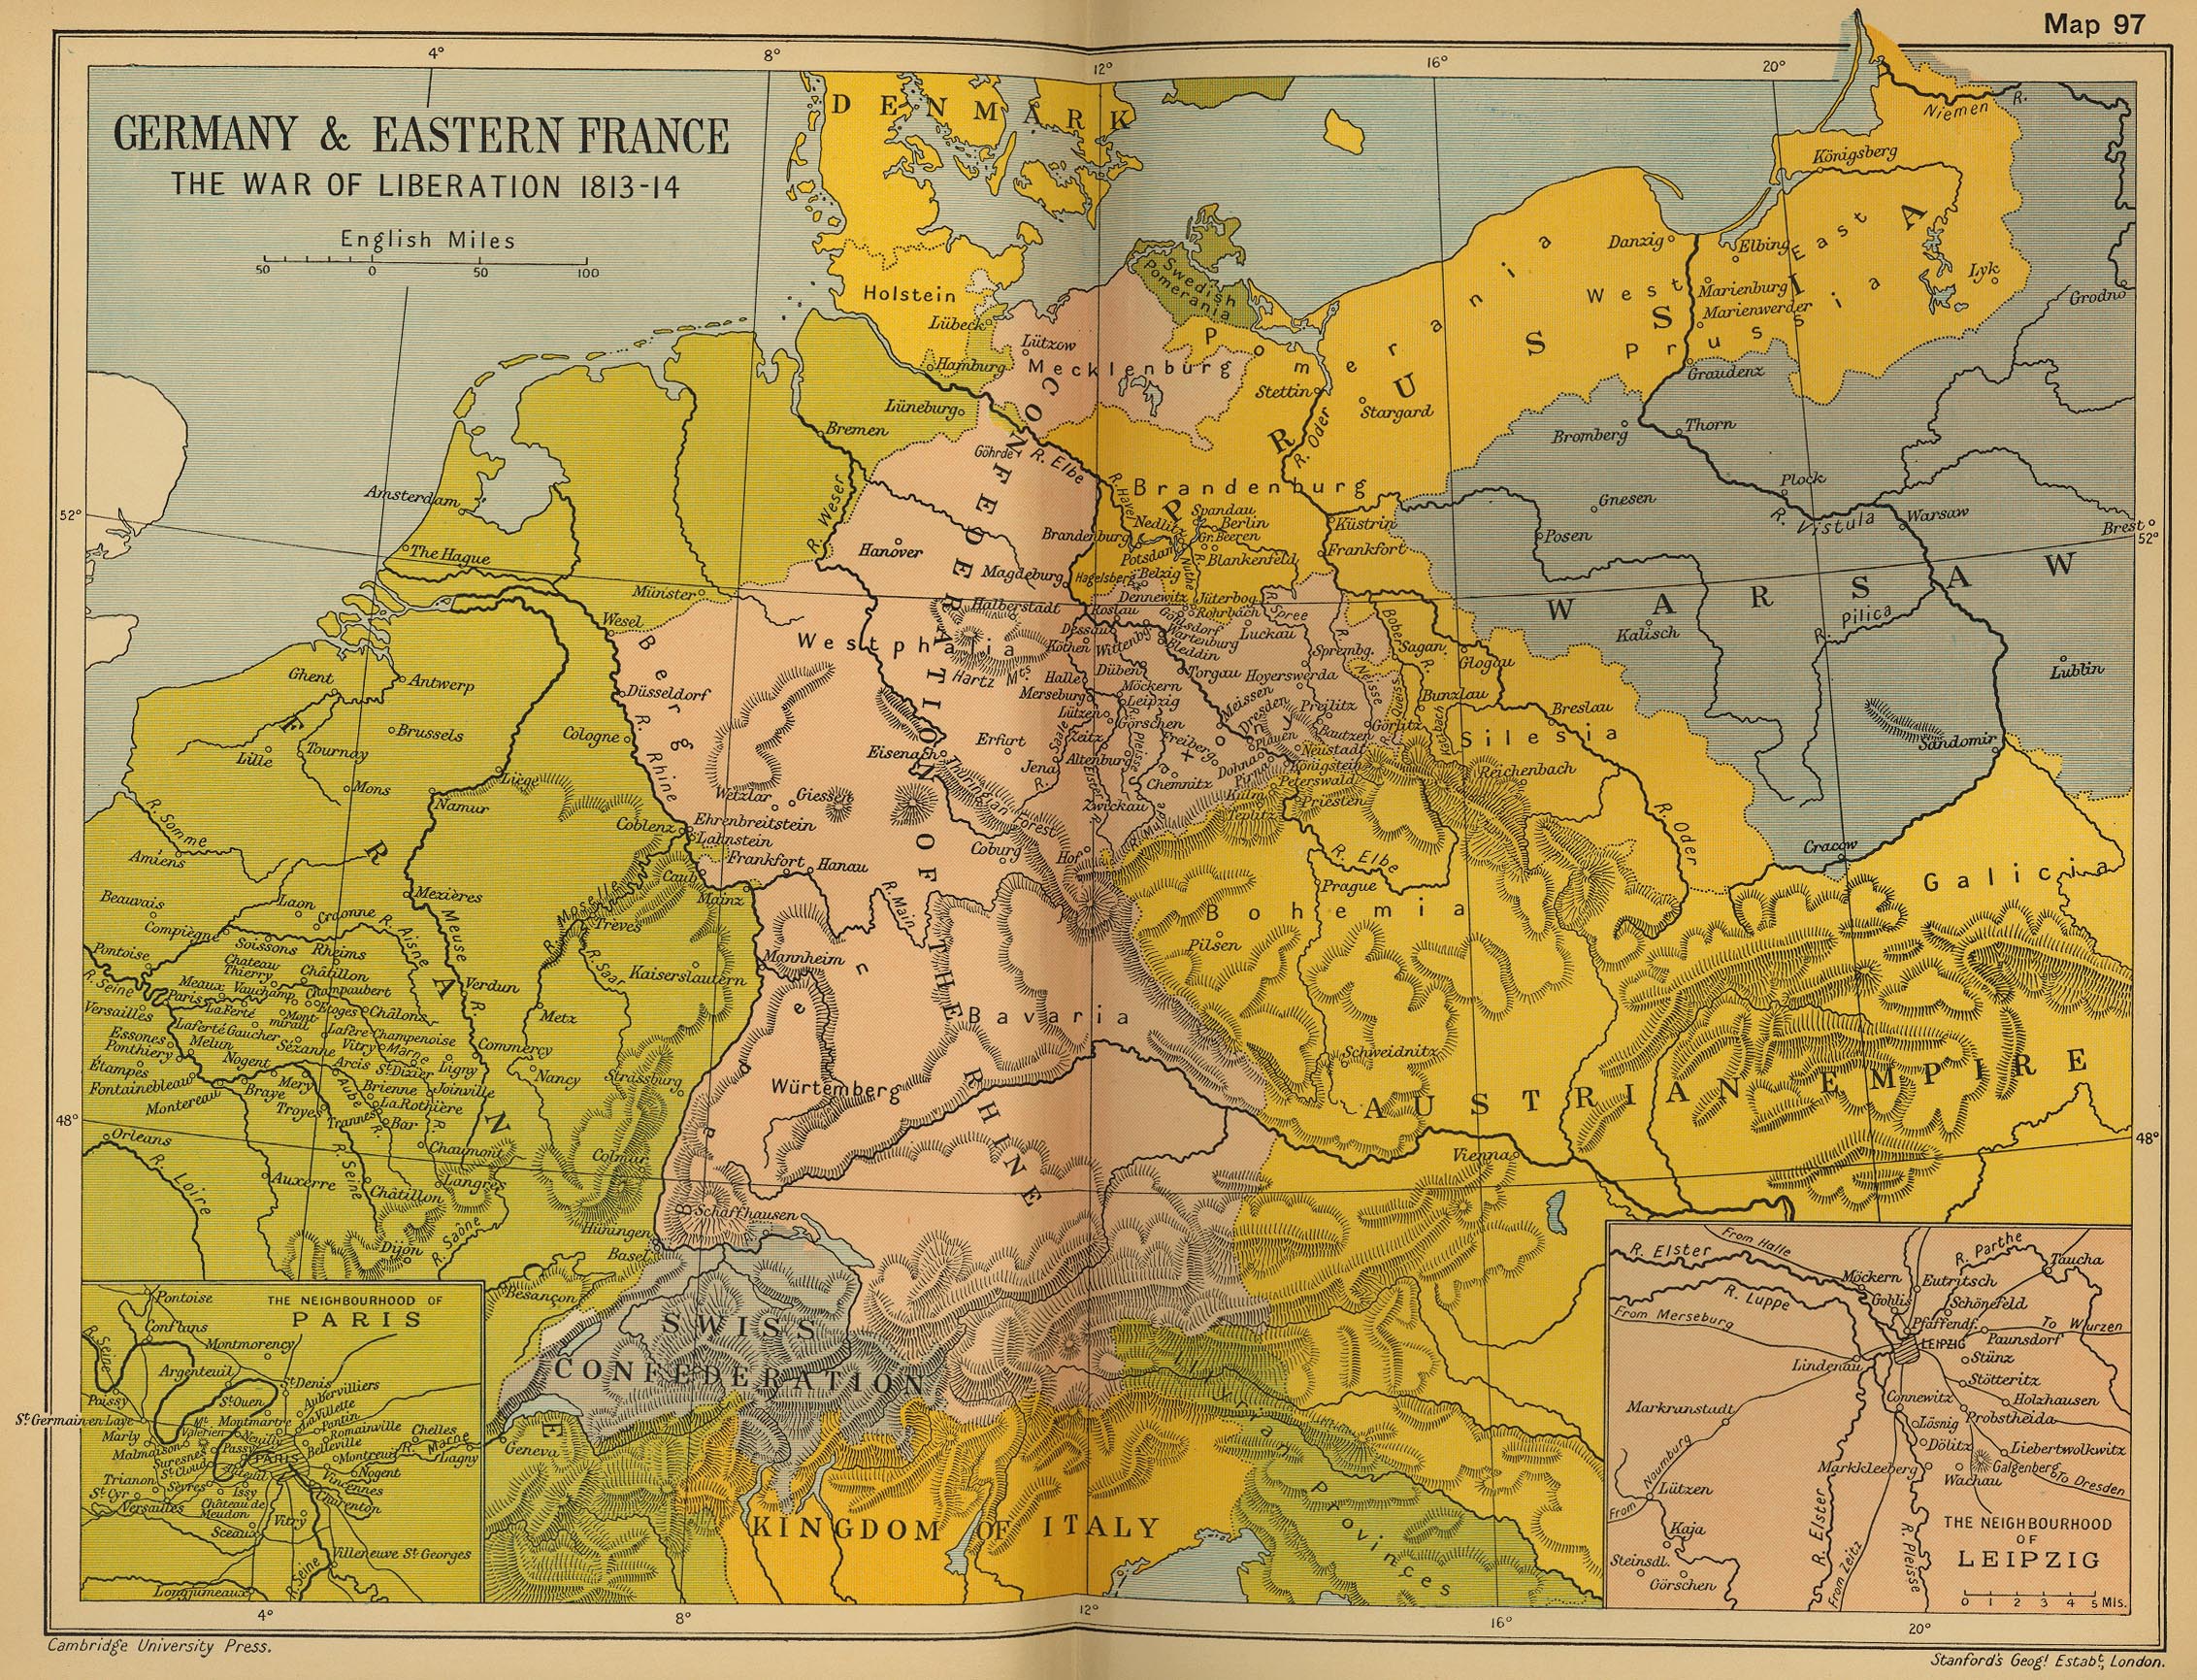 Map of Central Europe 1813-1814: The War of Liberation